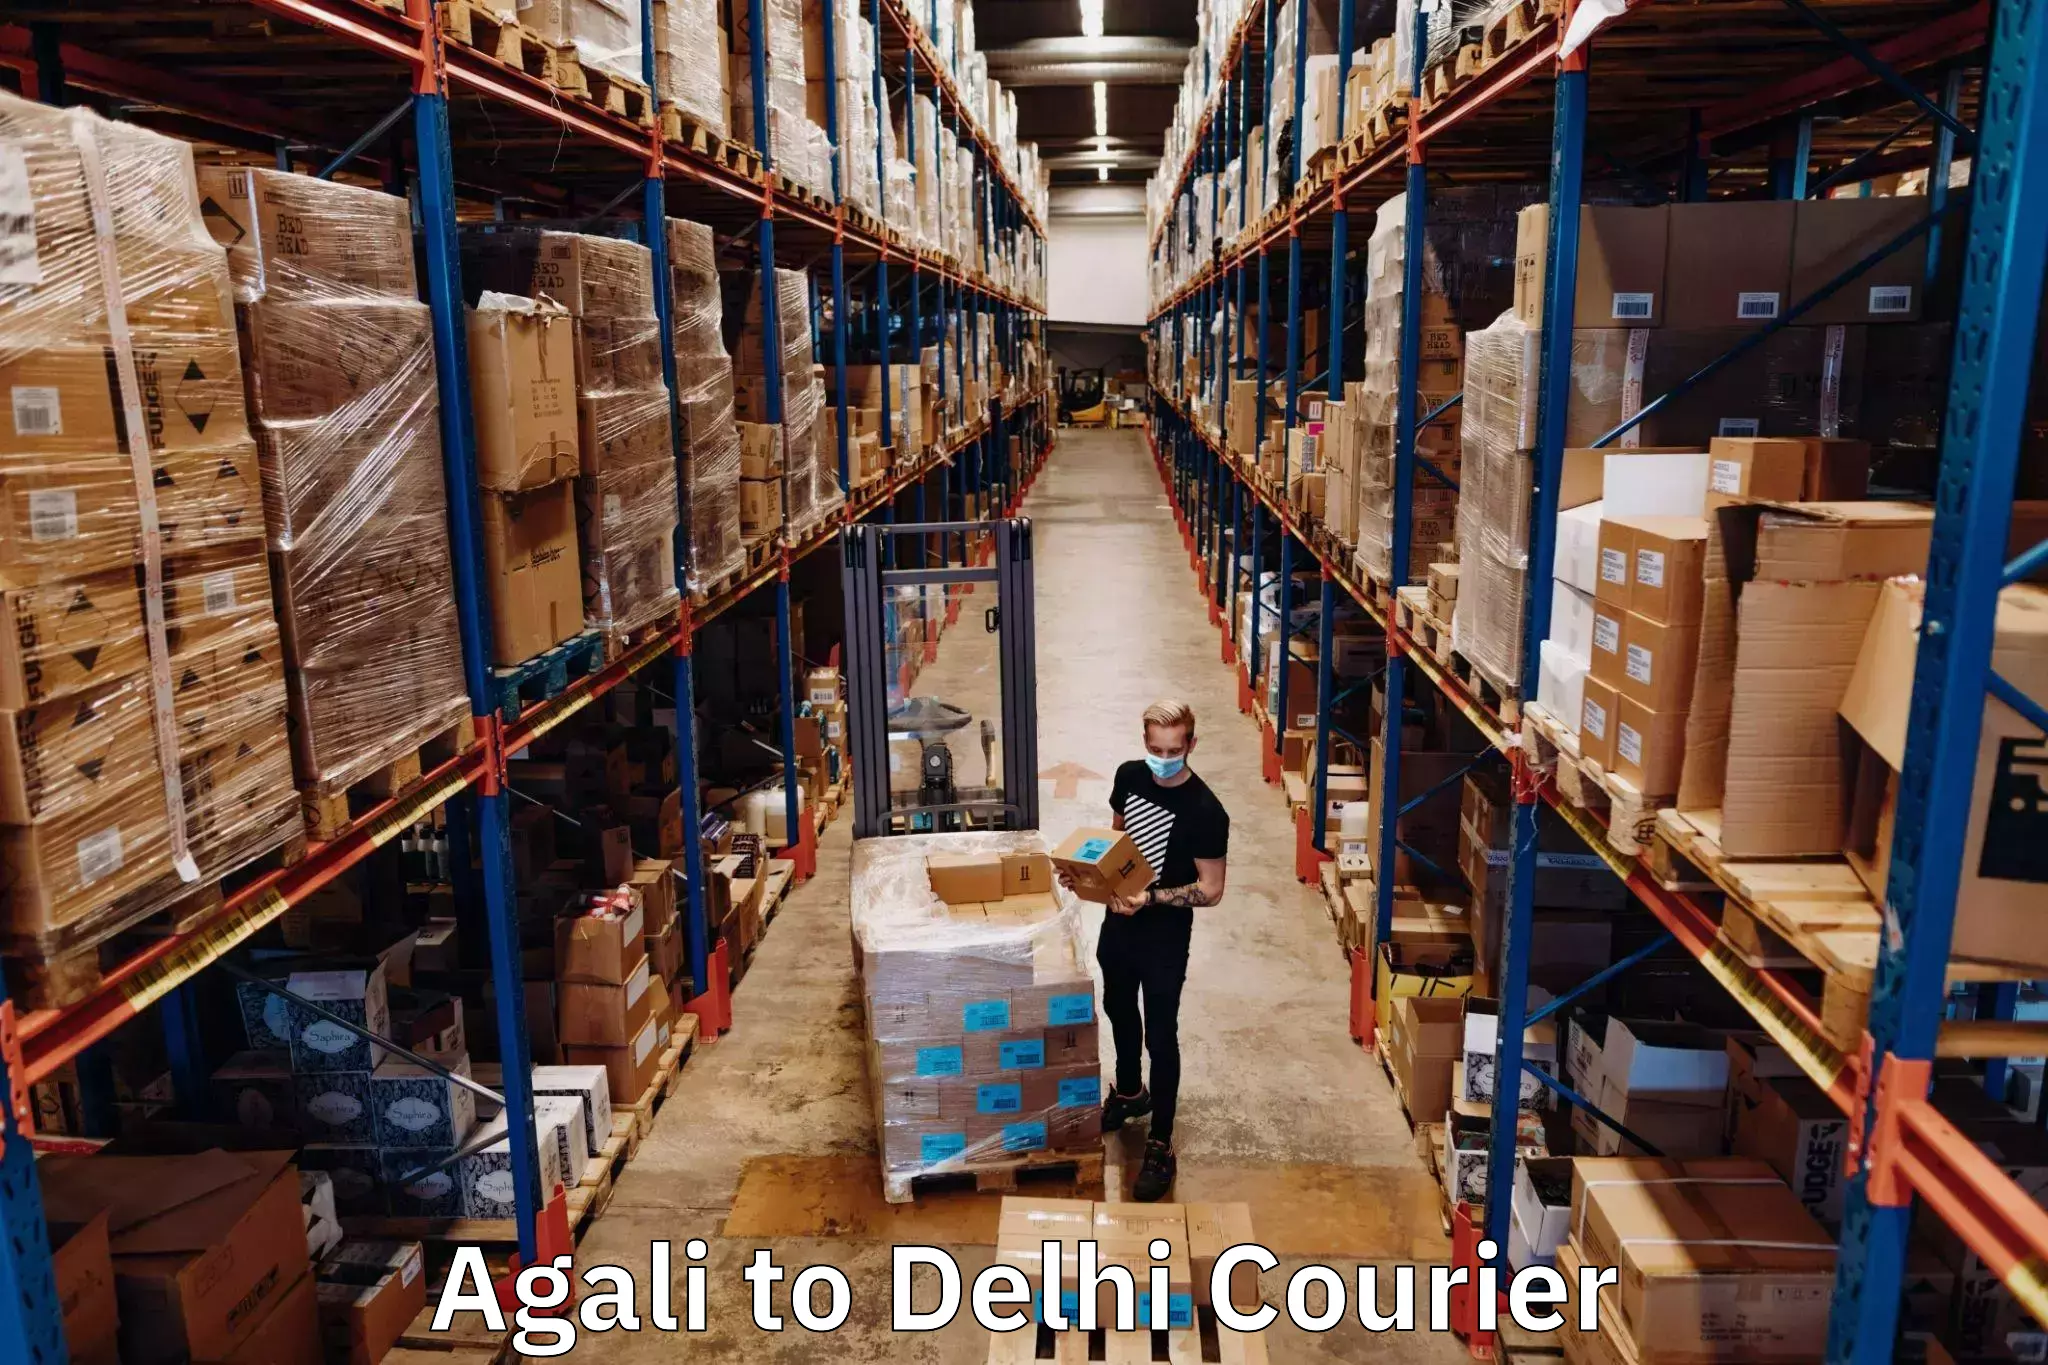 Courier service innovation Agali to East Delhi